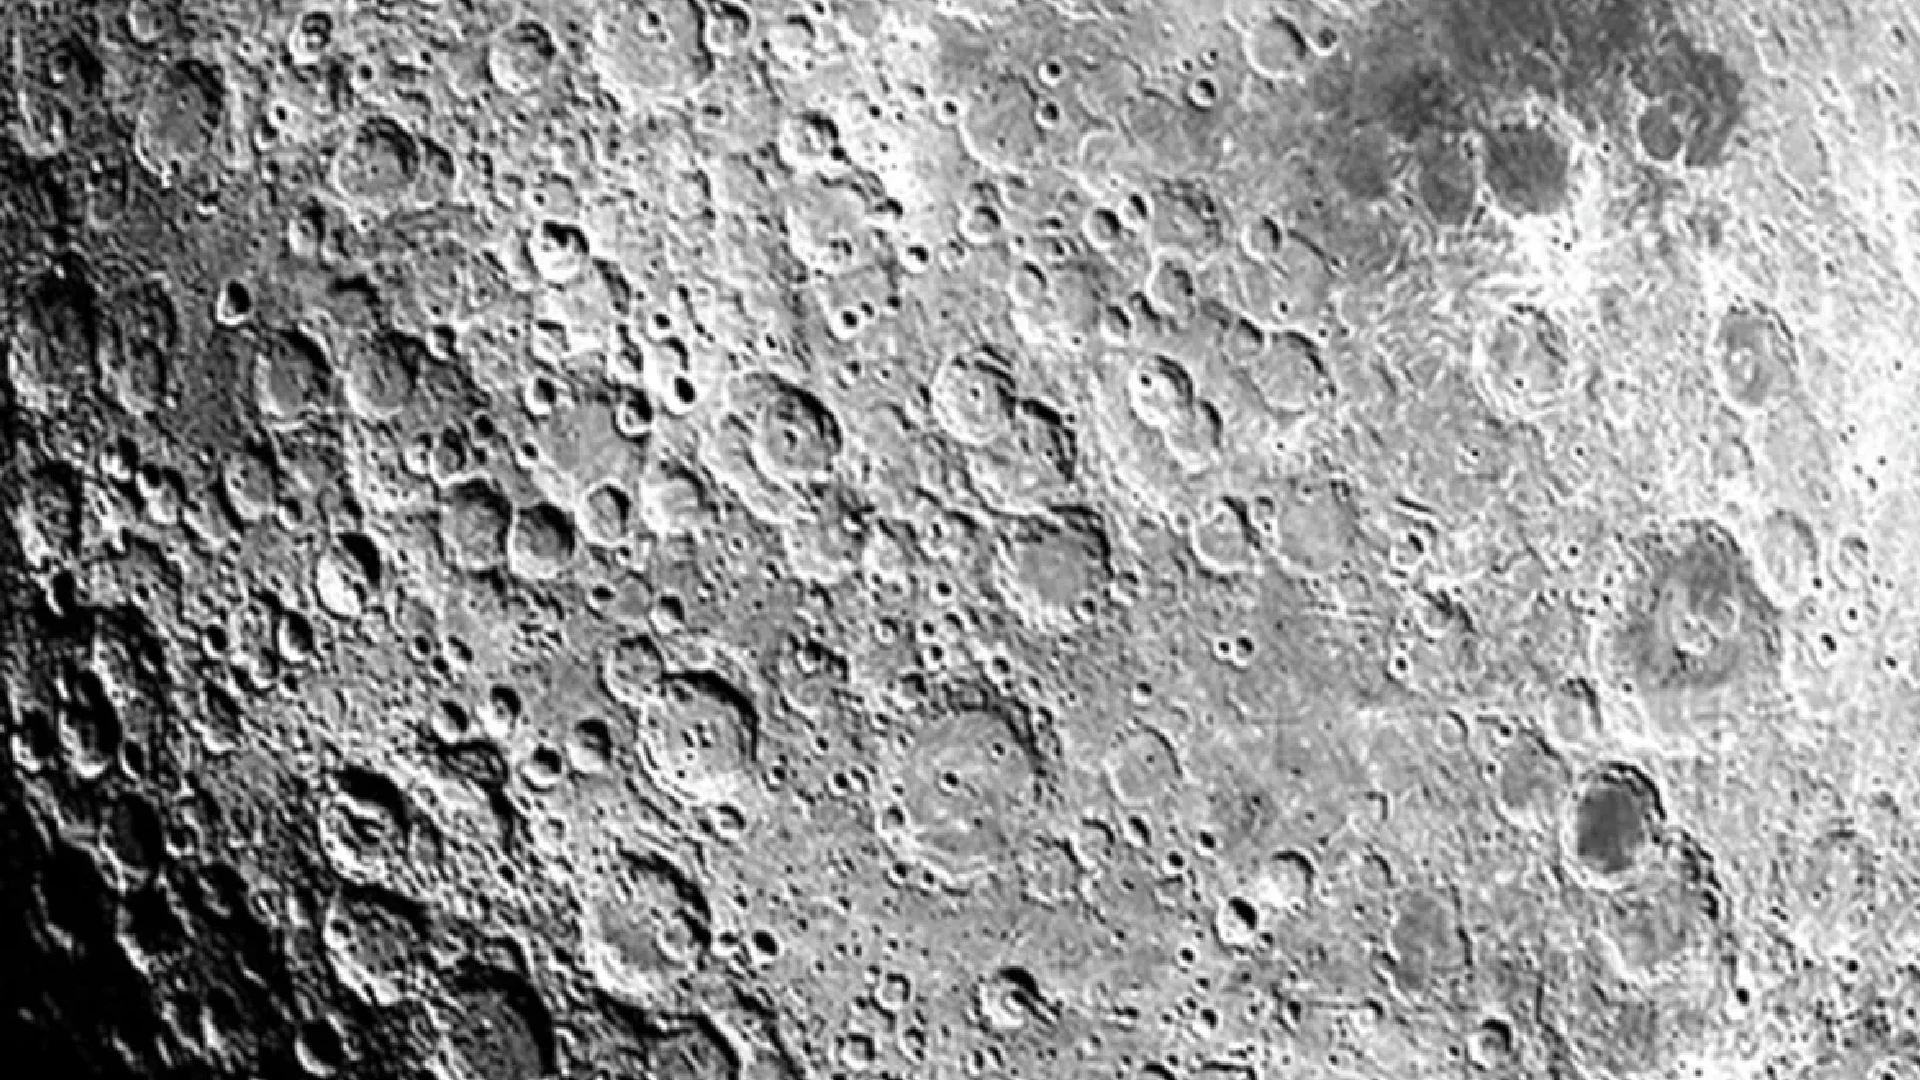 China Surpasses NASA By Publishing The “Most Detailed Map Of The Moon” Ever